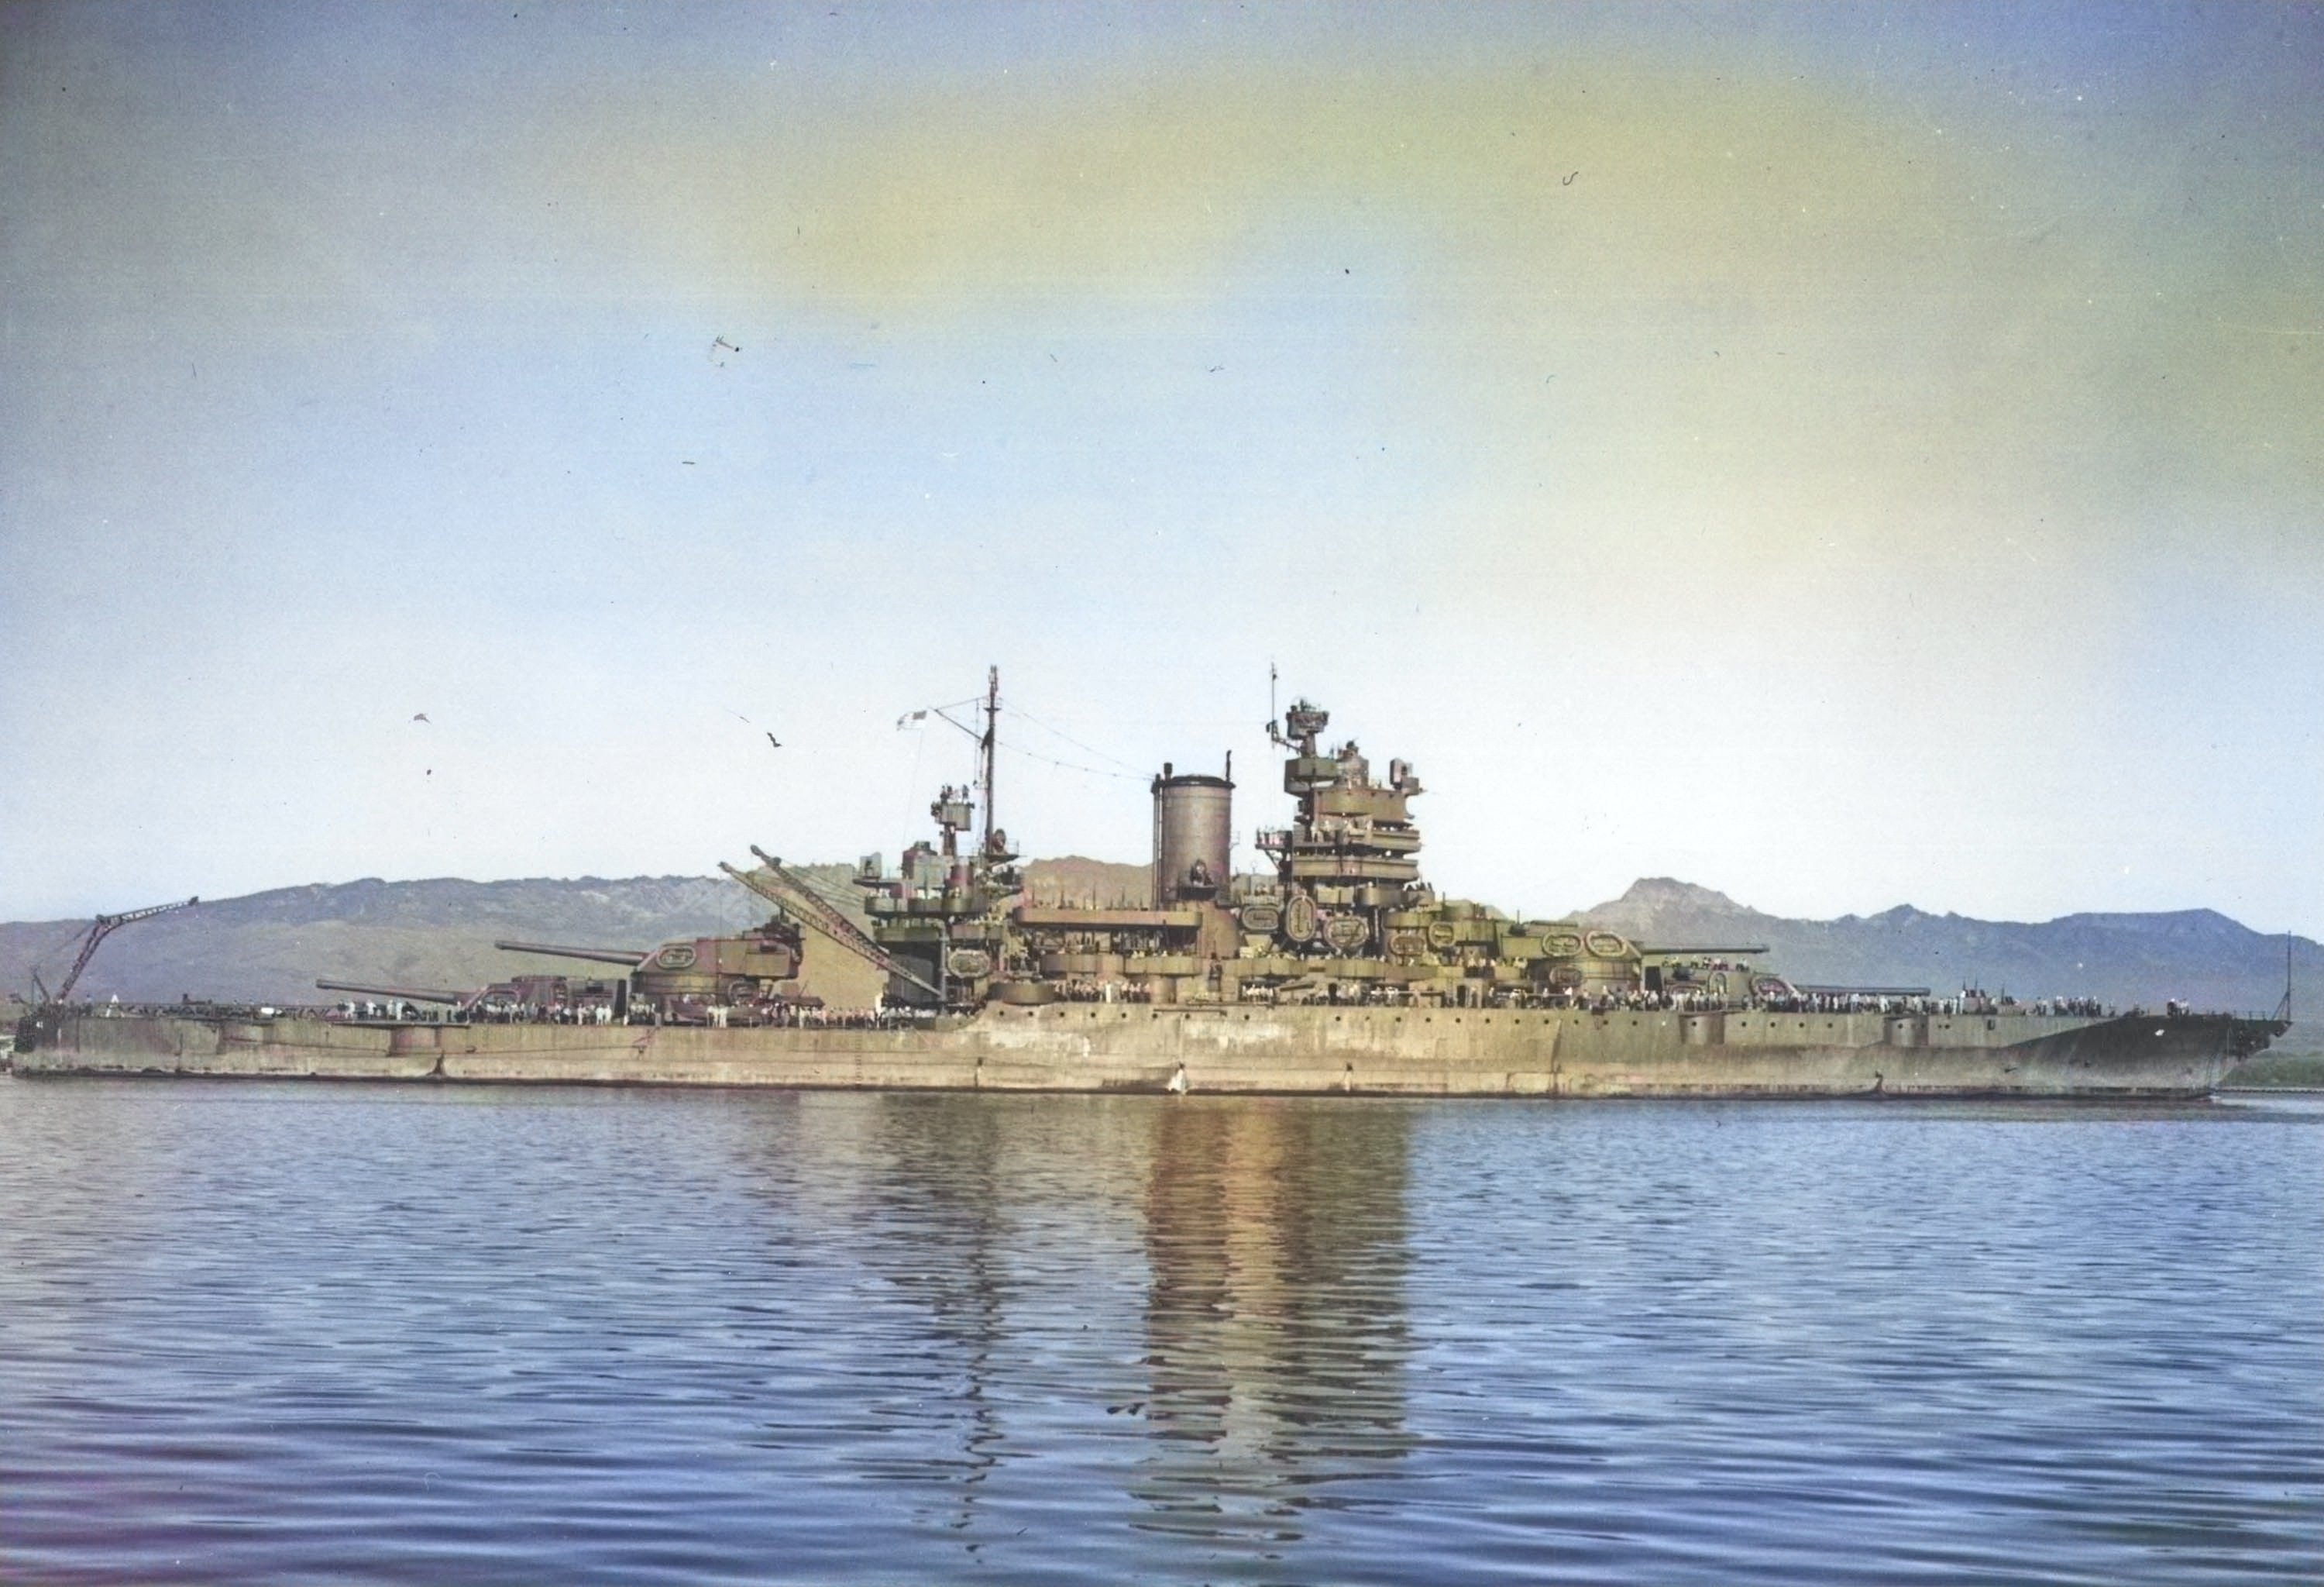 Battleship USS Mississippi entering Pearl Harbor, Hawaii, 2 Mar 1943. [Colorized by WW2DB]